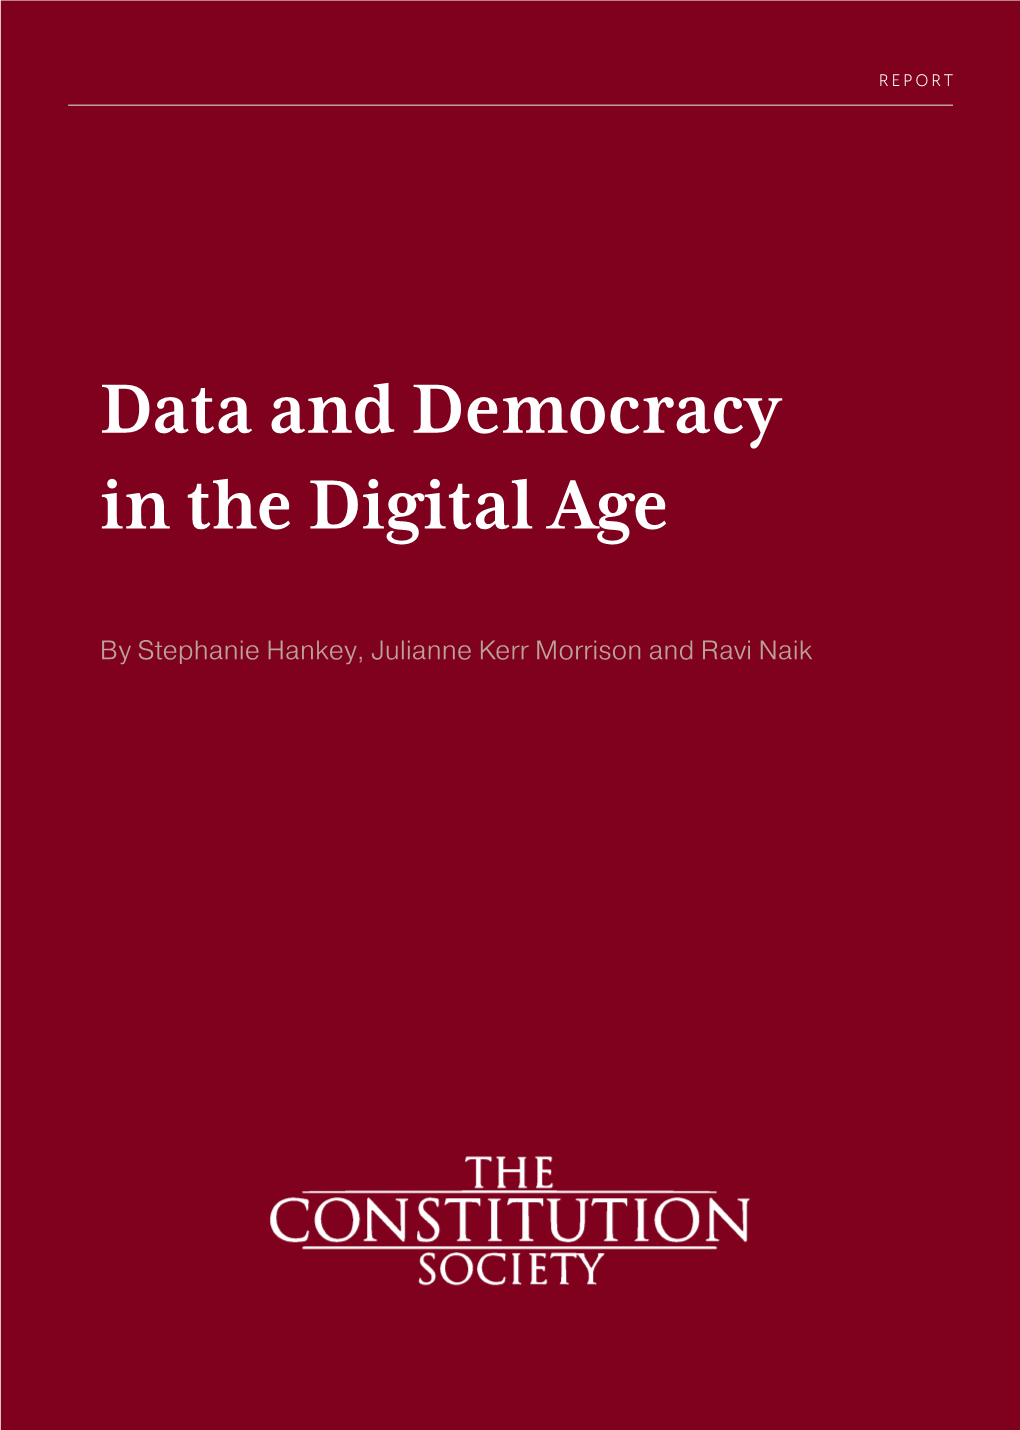 Data and Democracy in the Digital Age